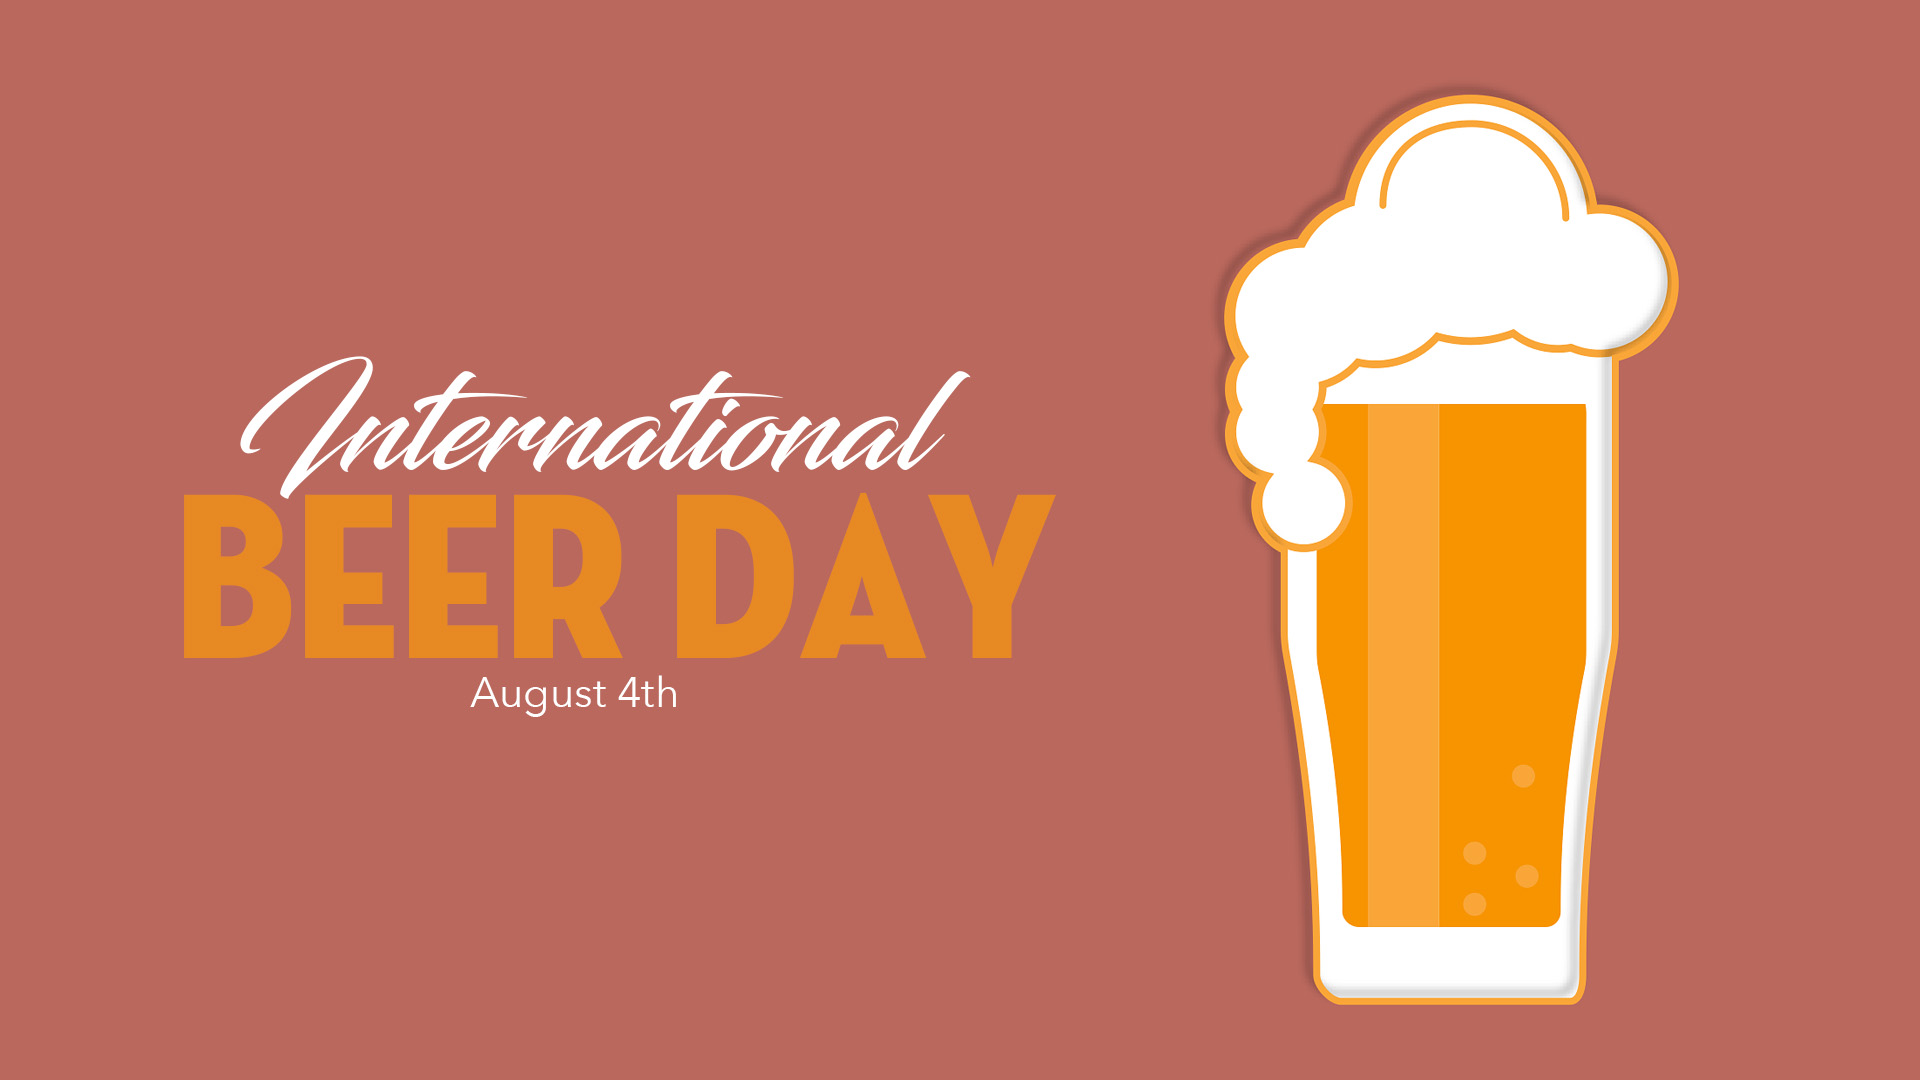 International Beer Day August 4th is on the left side of the graphic. International is in a white cursive font. Beer Day is written in a yellow bold thick font. August 4th is written in a white thin sans serif font. Towards the right of the image there is a illustrated geometric image of a beer in a glass mug with foam overflowing.